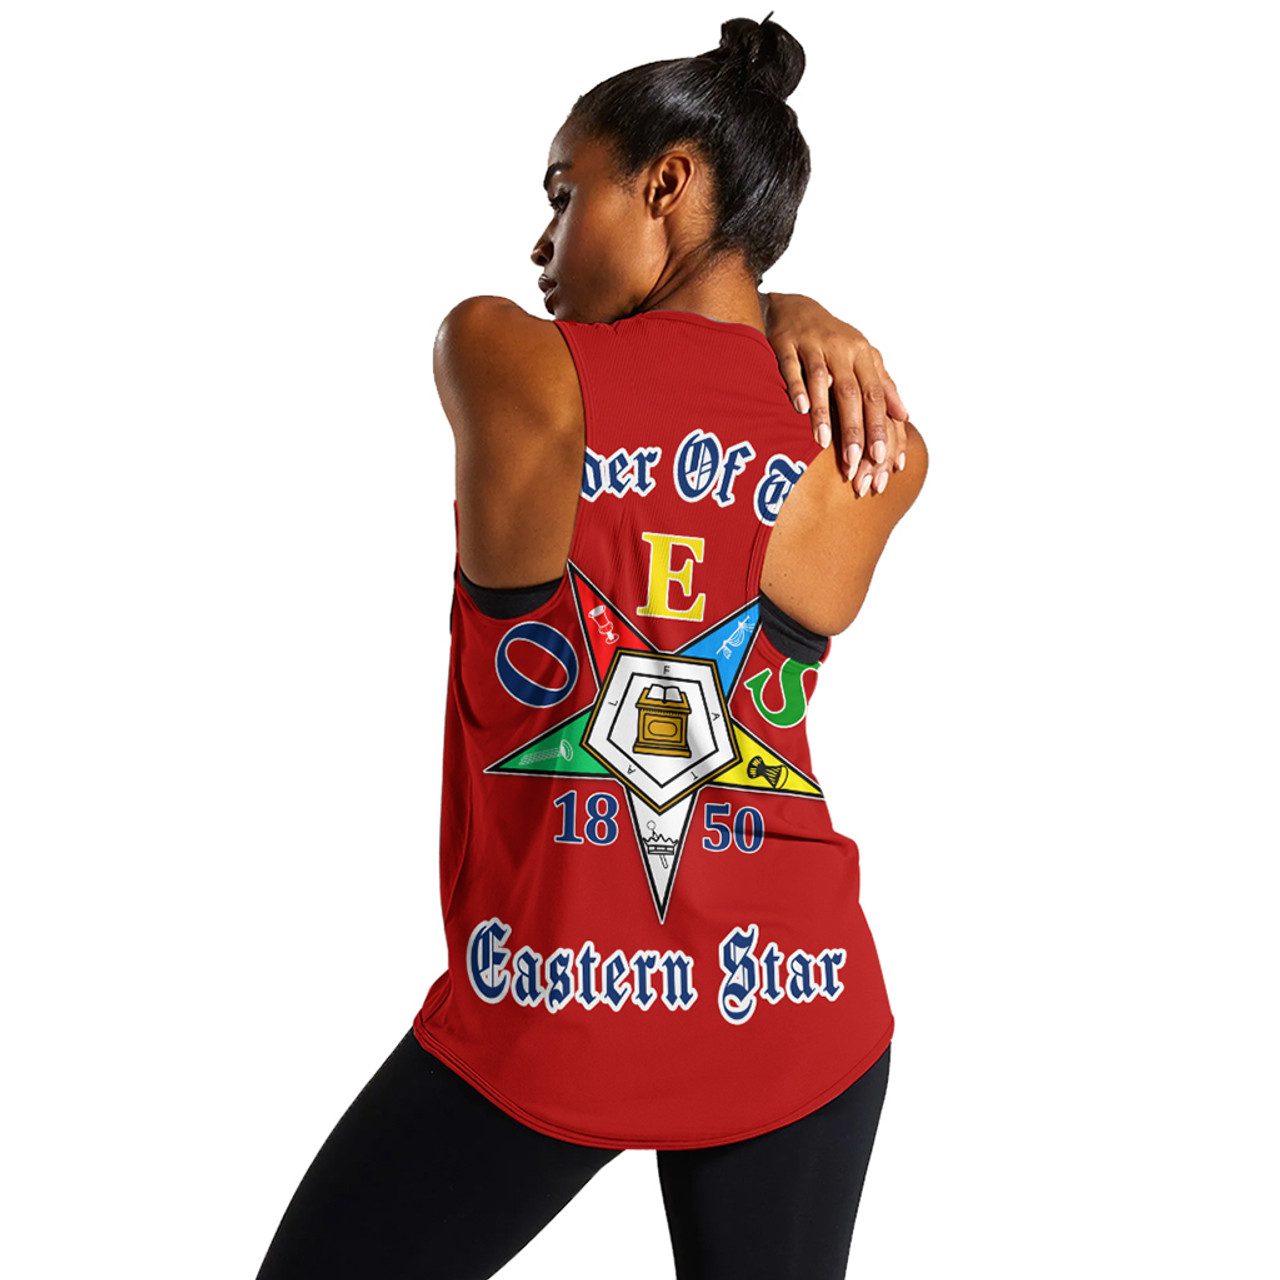 Order of the Eastern Star Women Tank Pearls Red